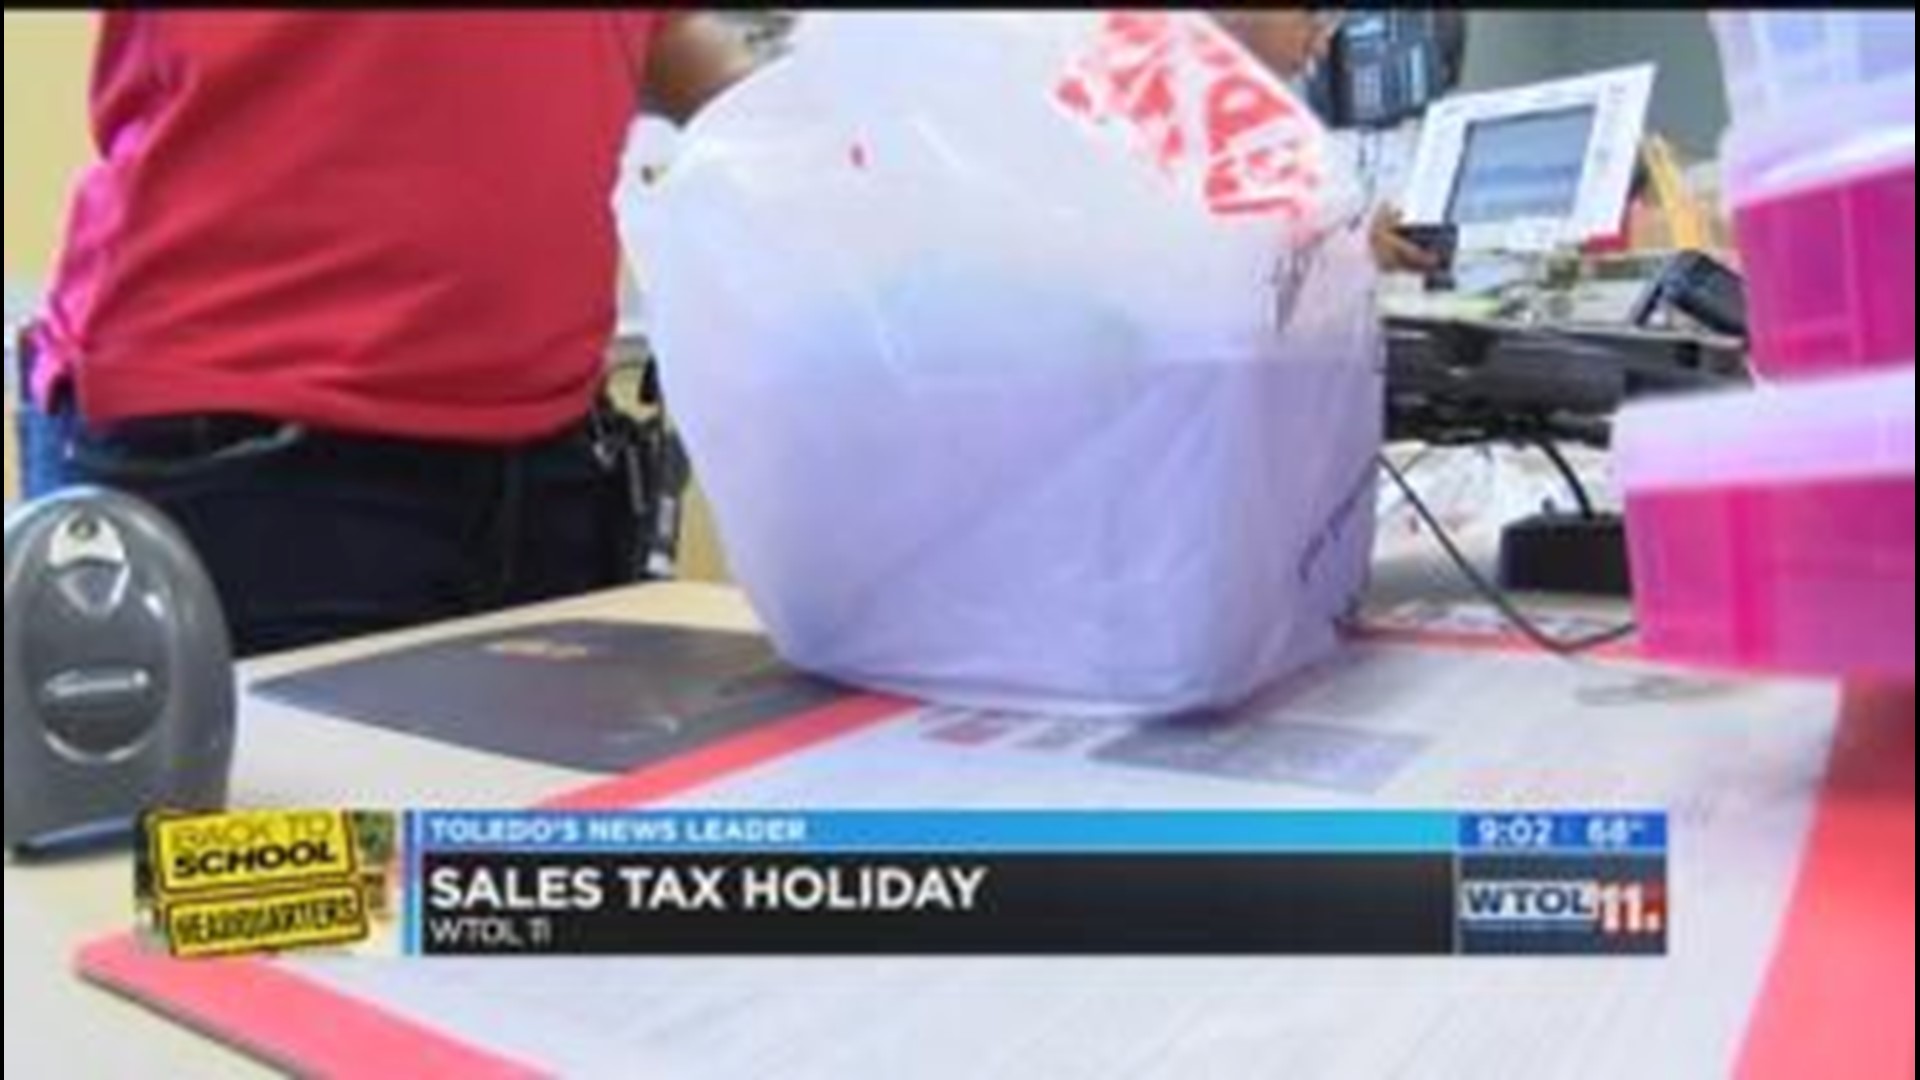 Save money on school supplies during the sales tax holiday